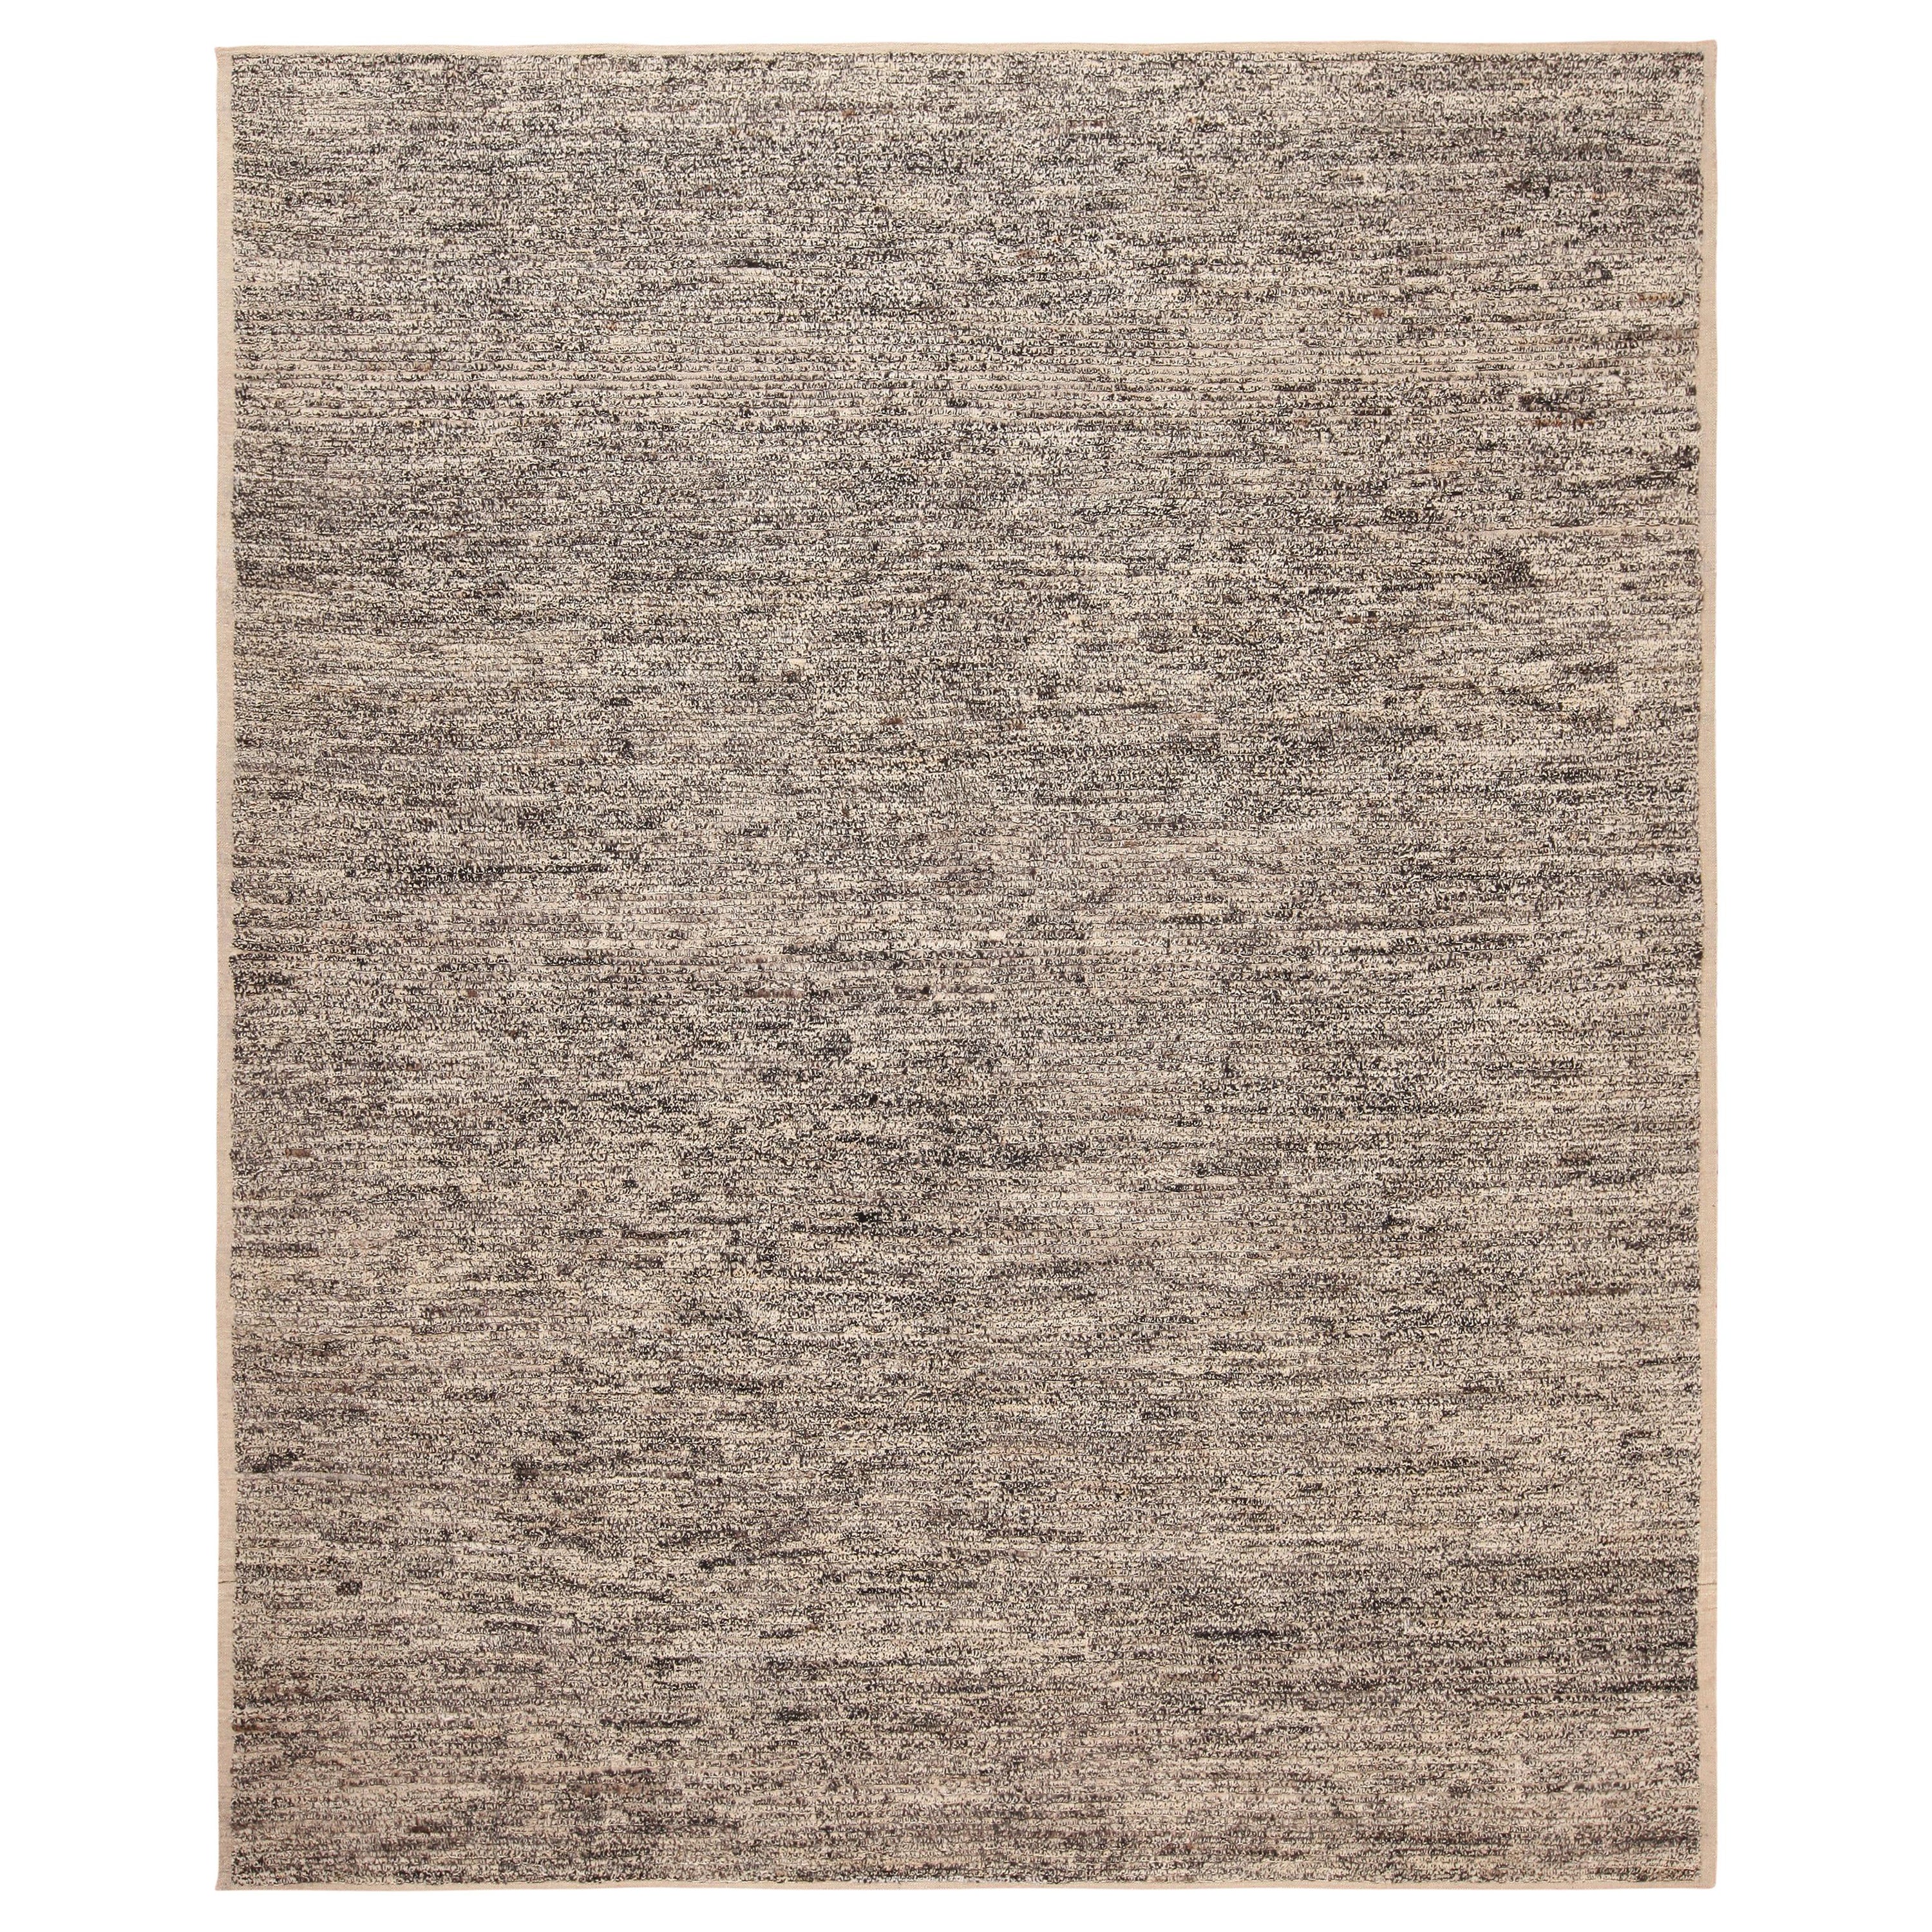 Nazmiyal Collection Textured Beige Modern Distressed Rug. 9 ft 6 in x 11 ft 6 in For Sale